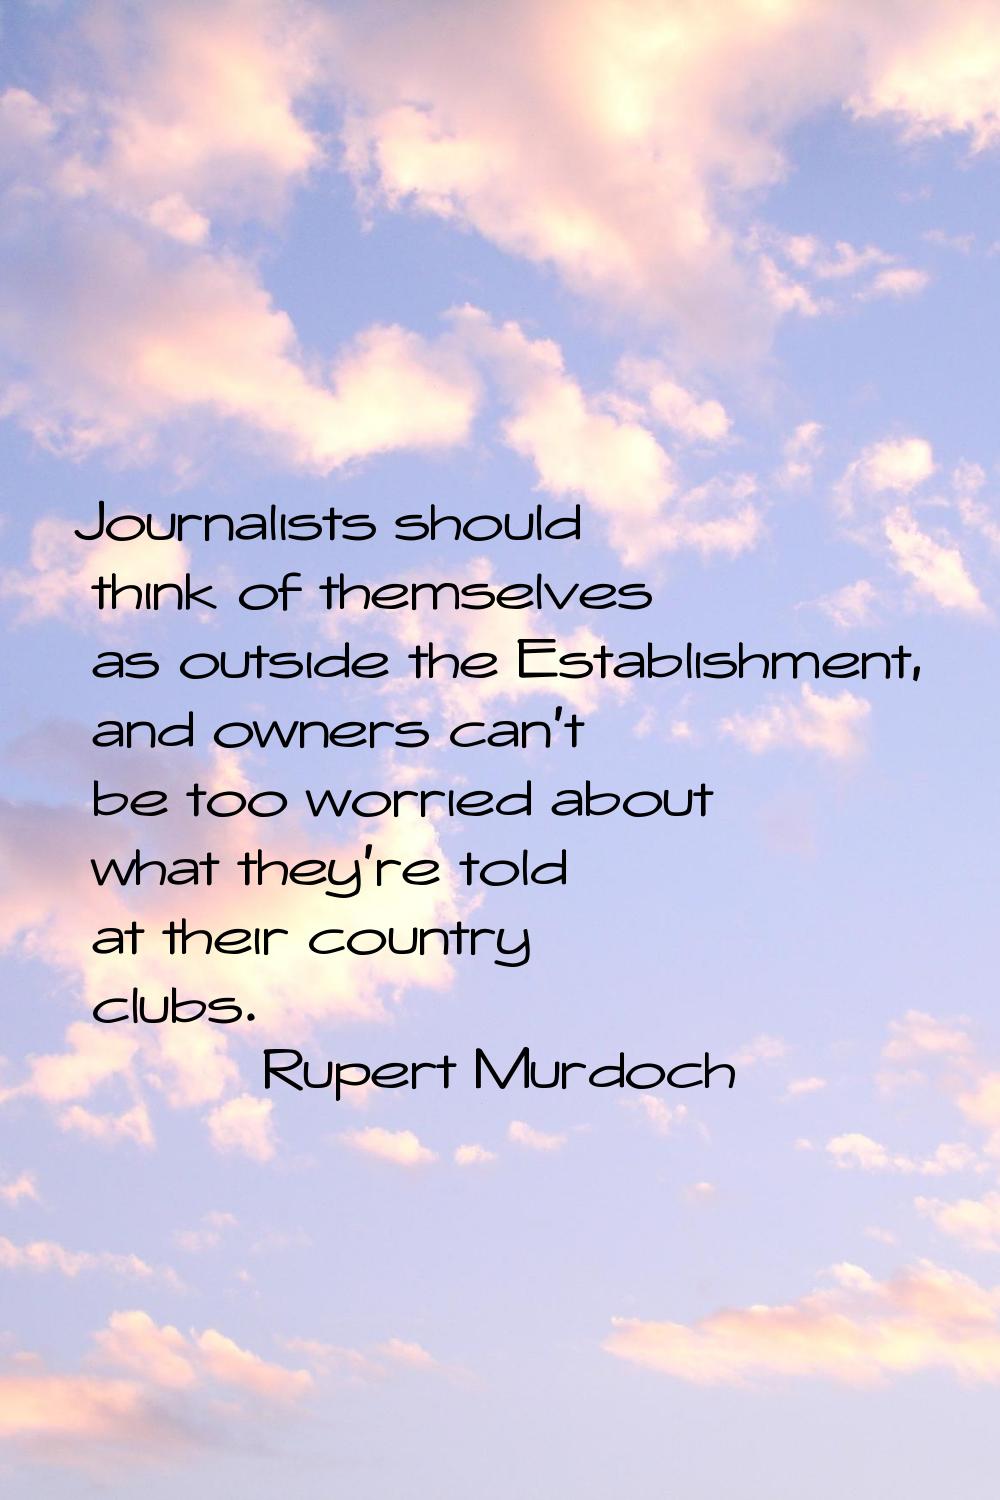 Journalists should think of themselves as outside the Establishment, and owners can't be too worrie